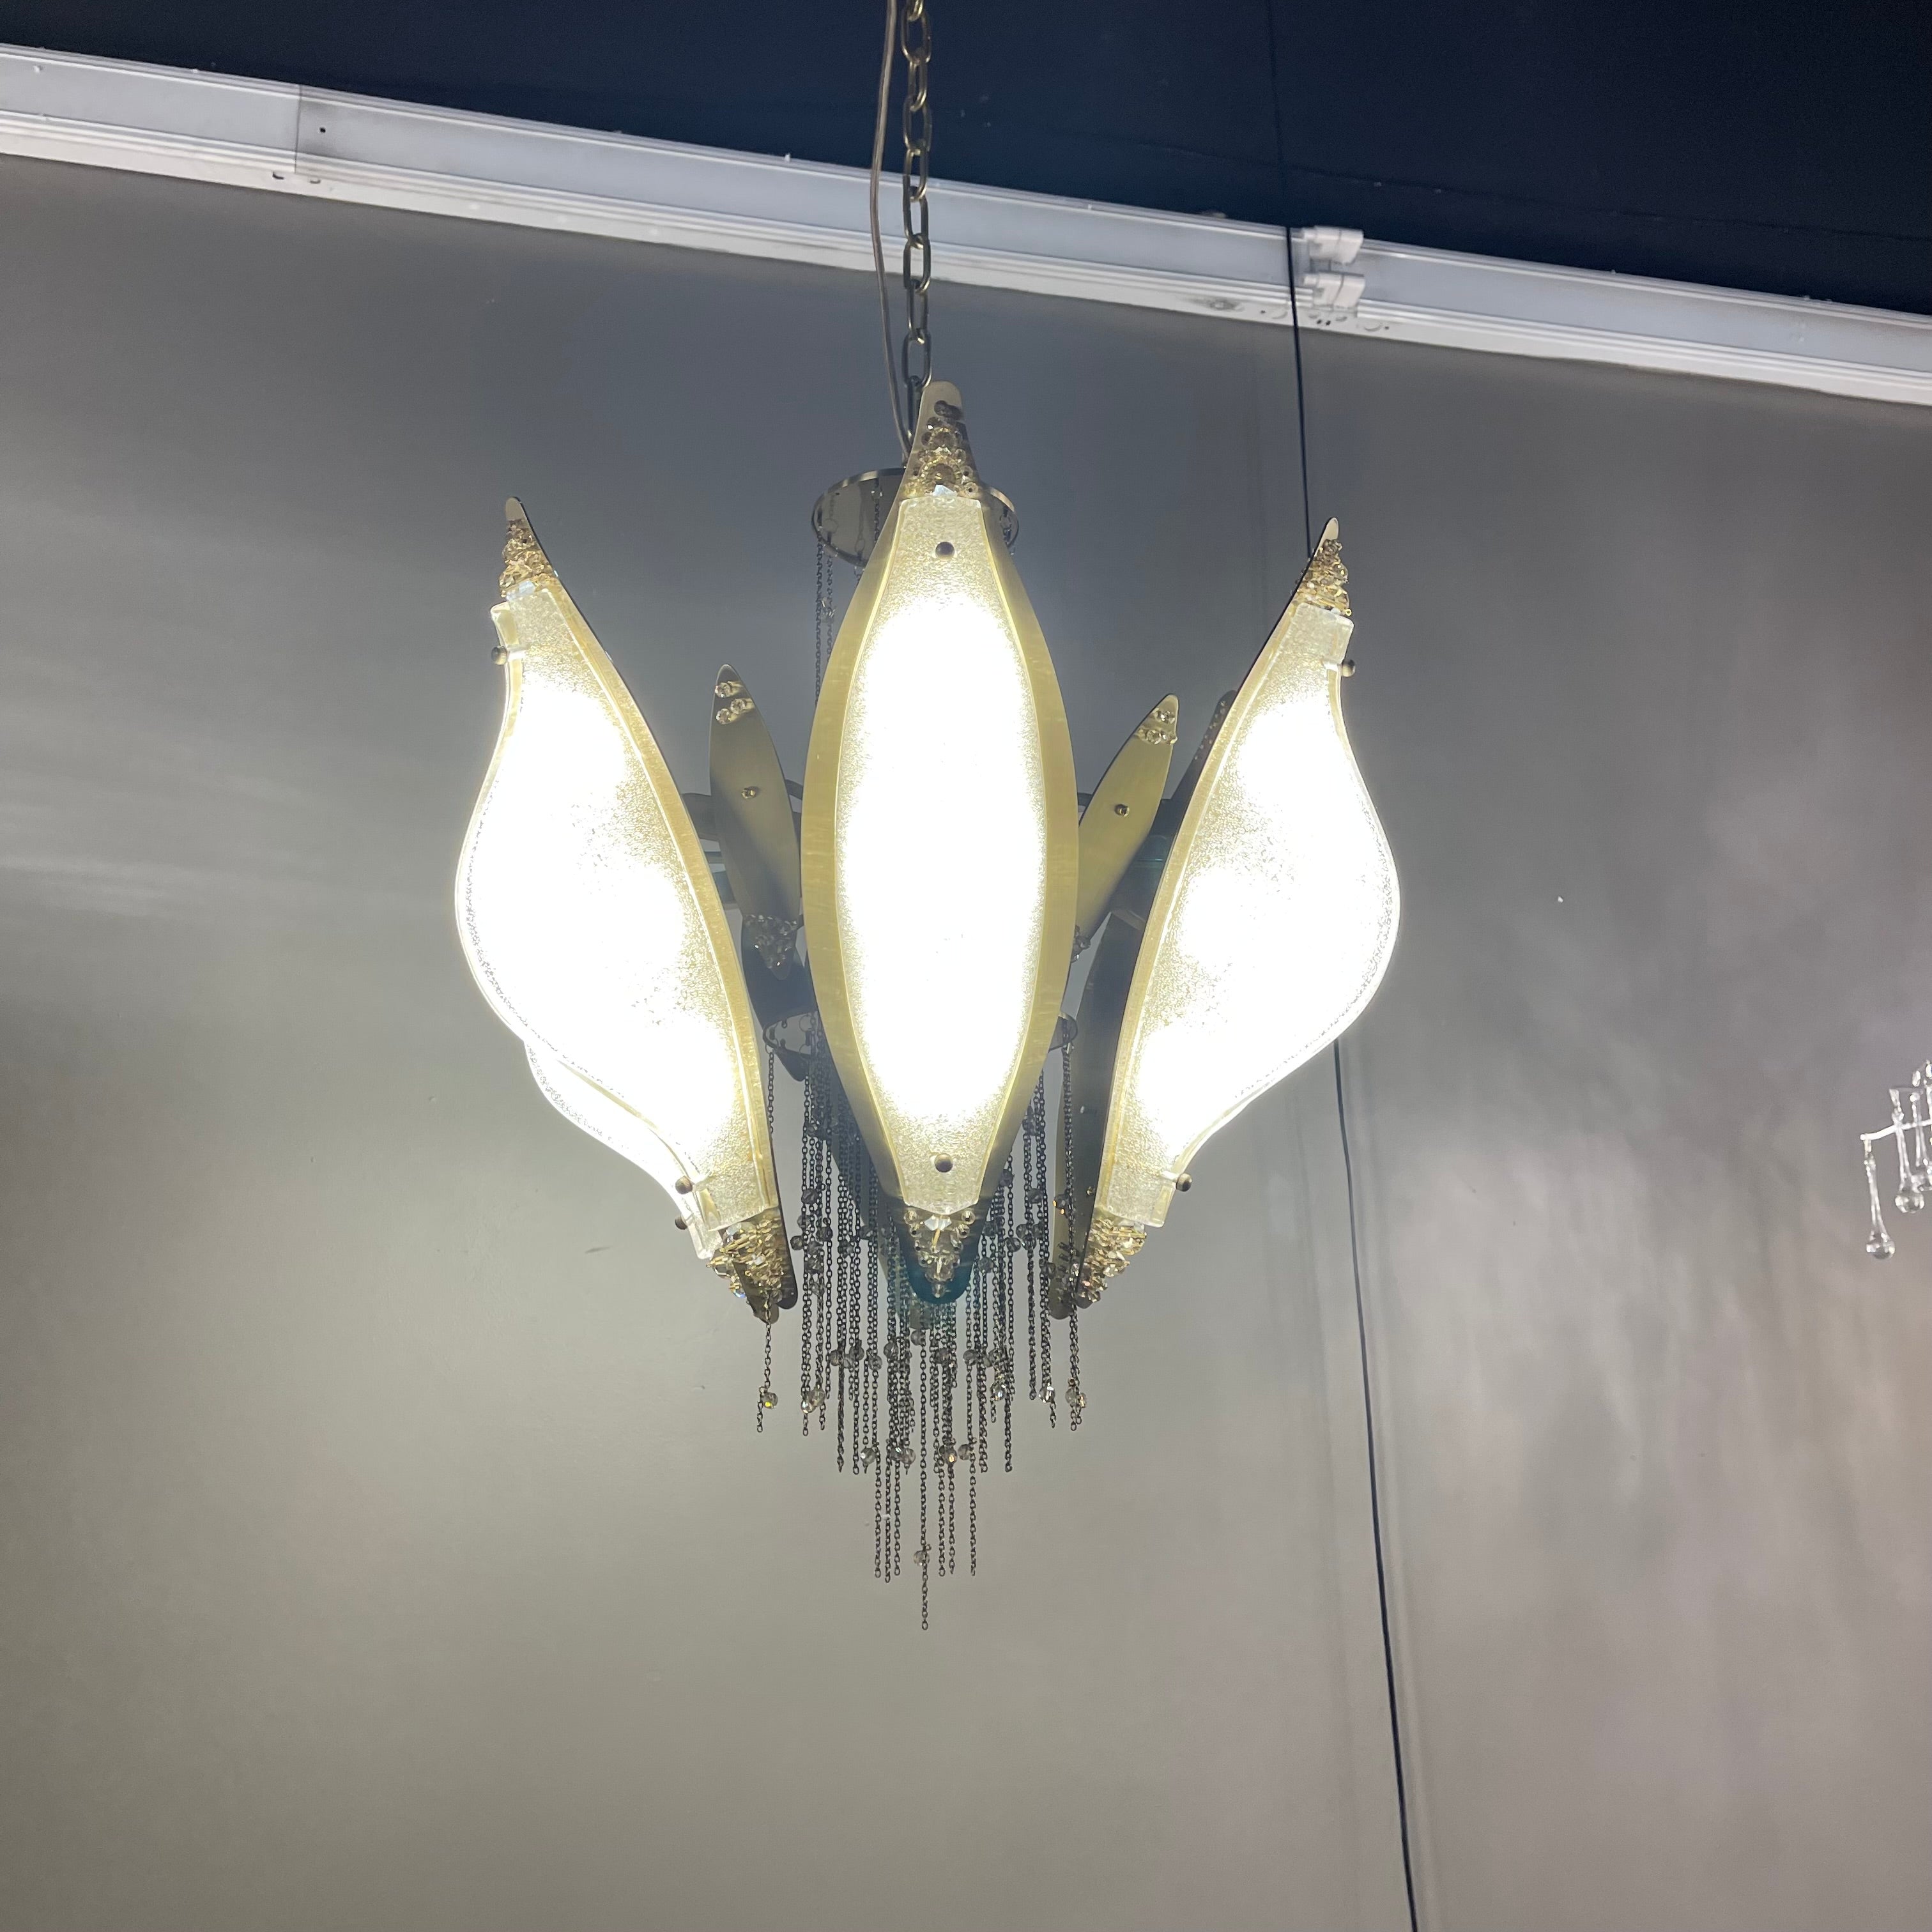 Aria Closed-Flower Crystal Murano Chandelier